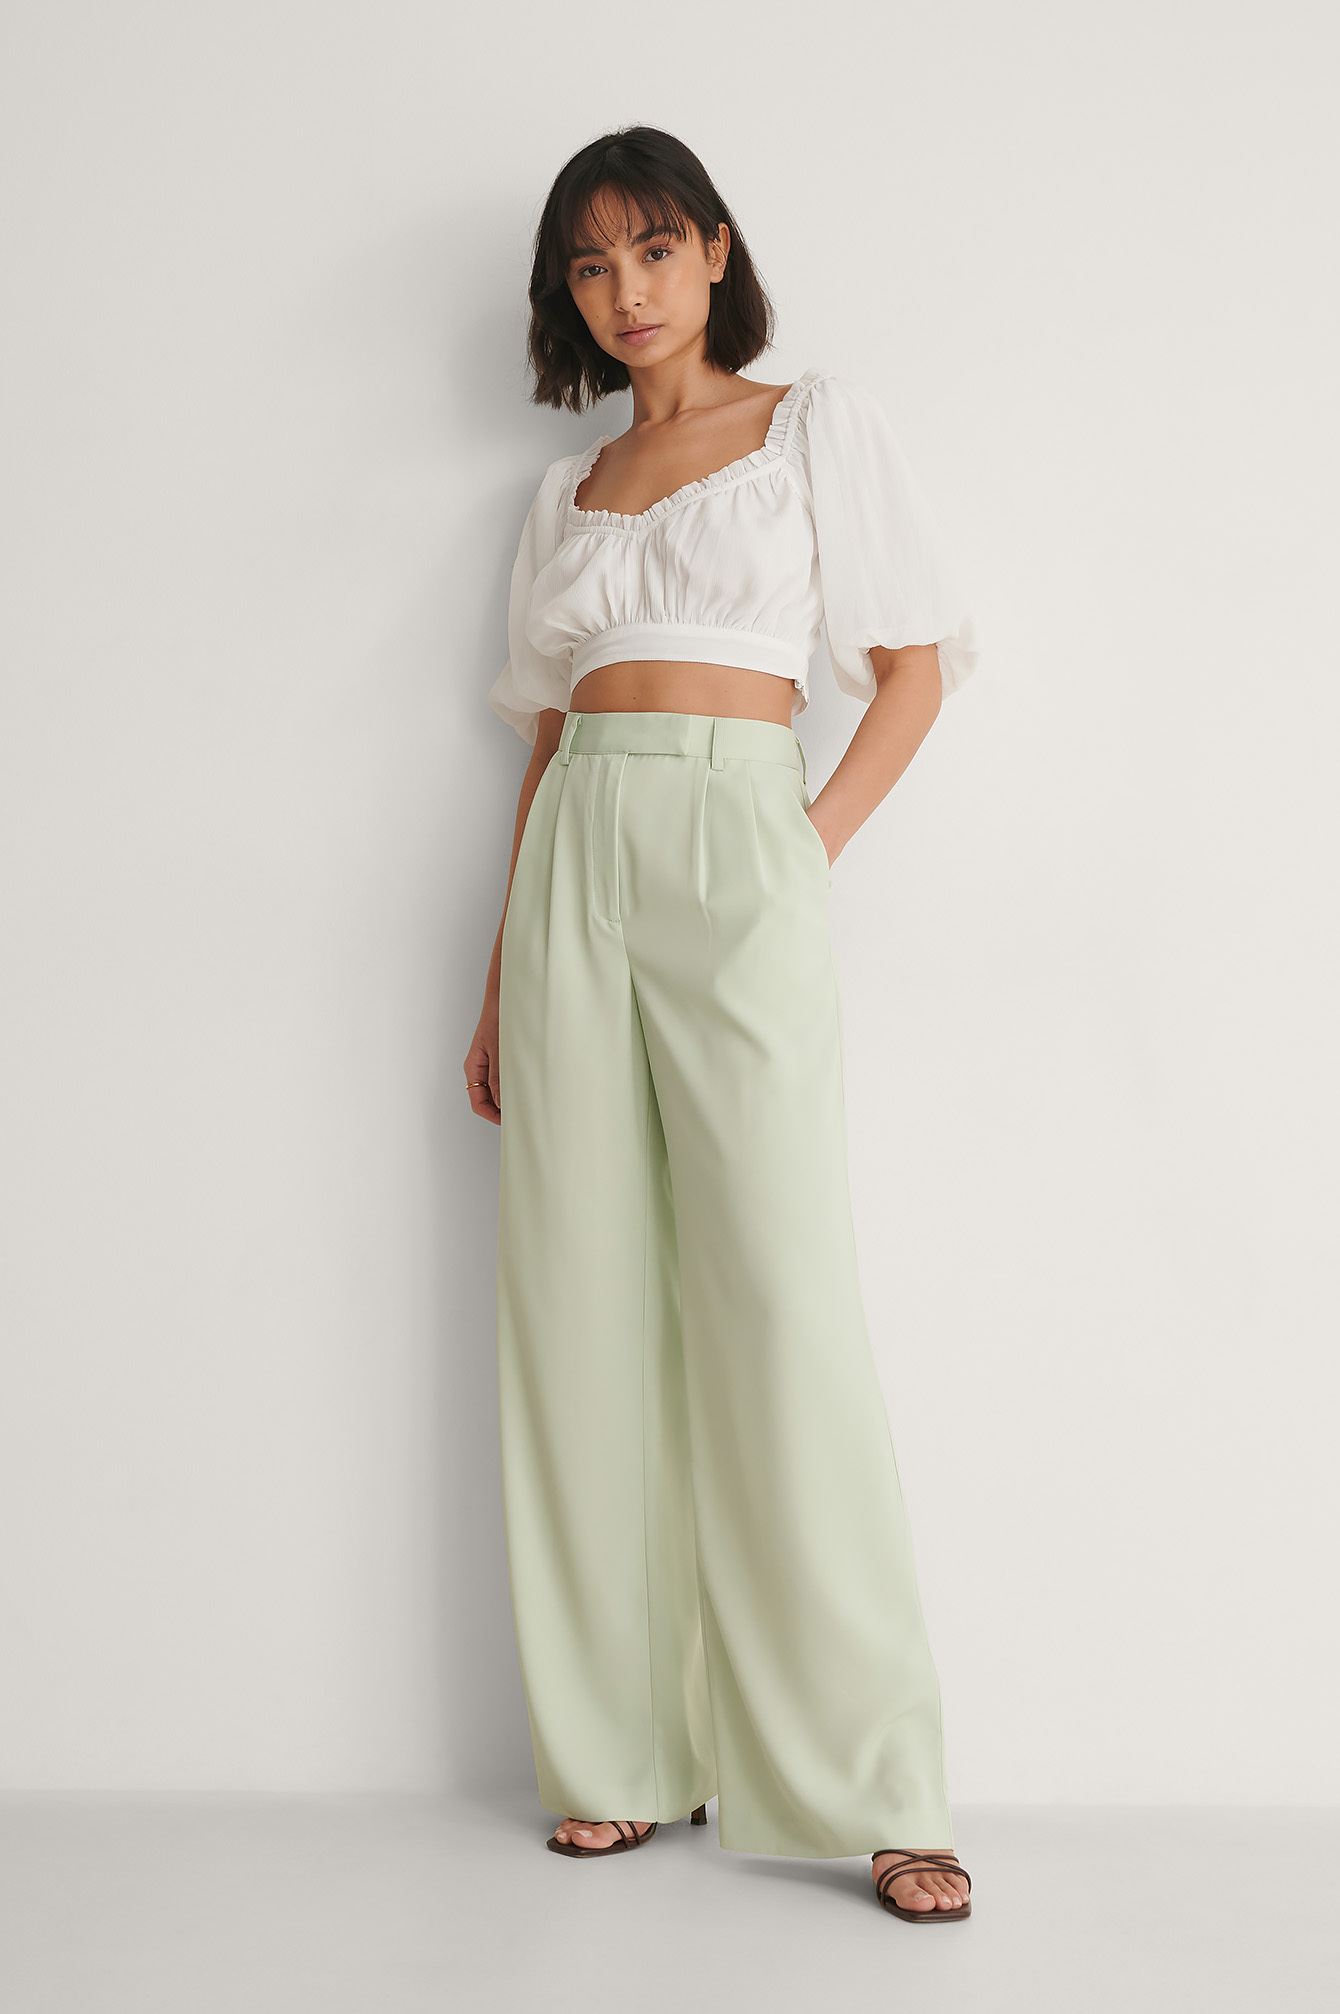 Frill Detail Cropped Top Outfit